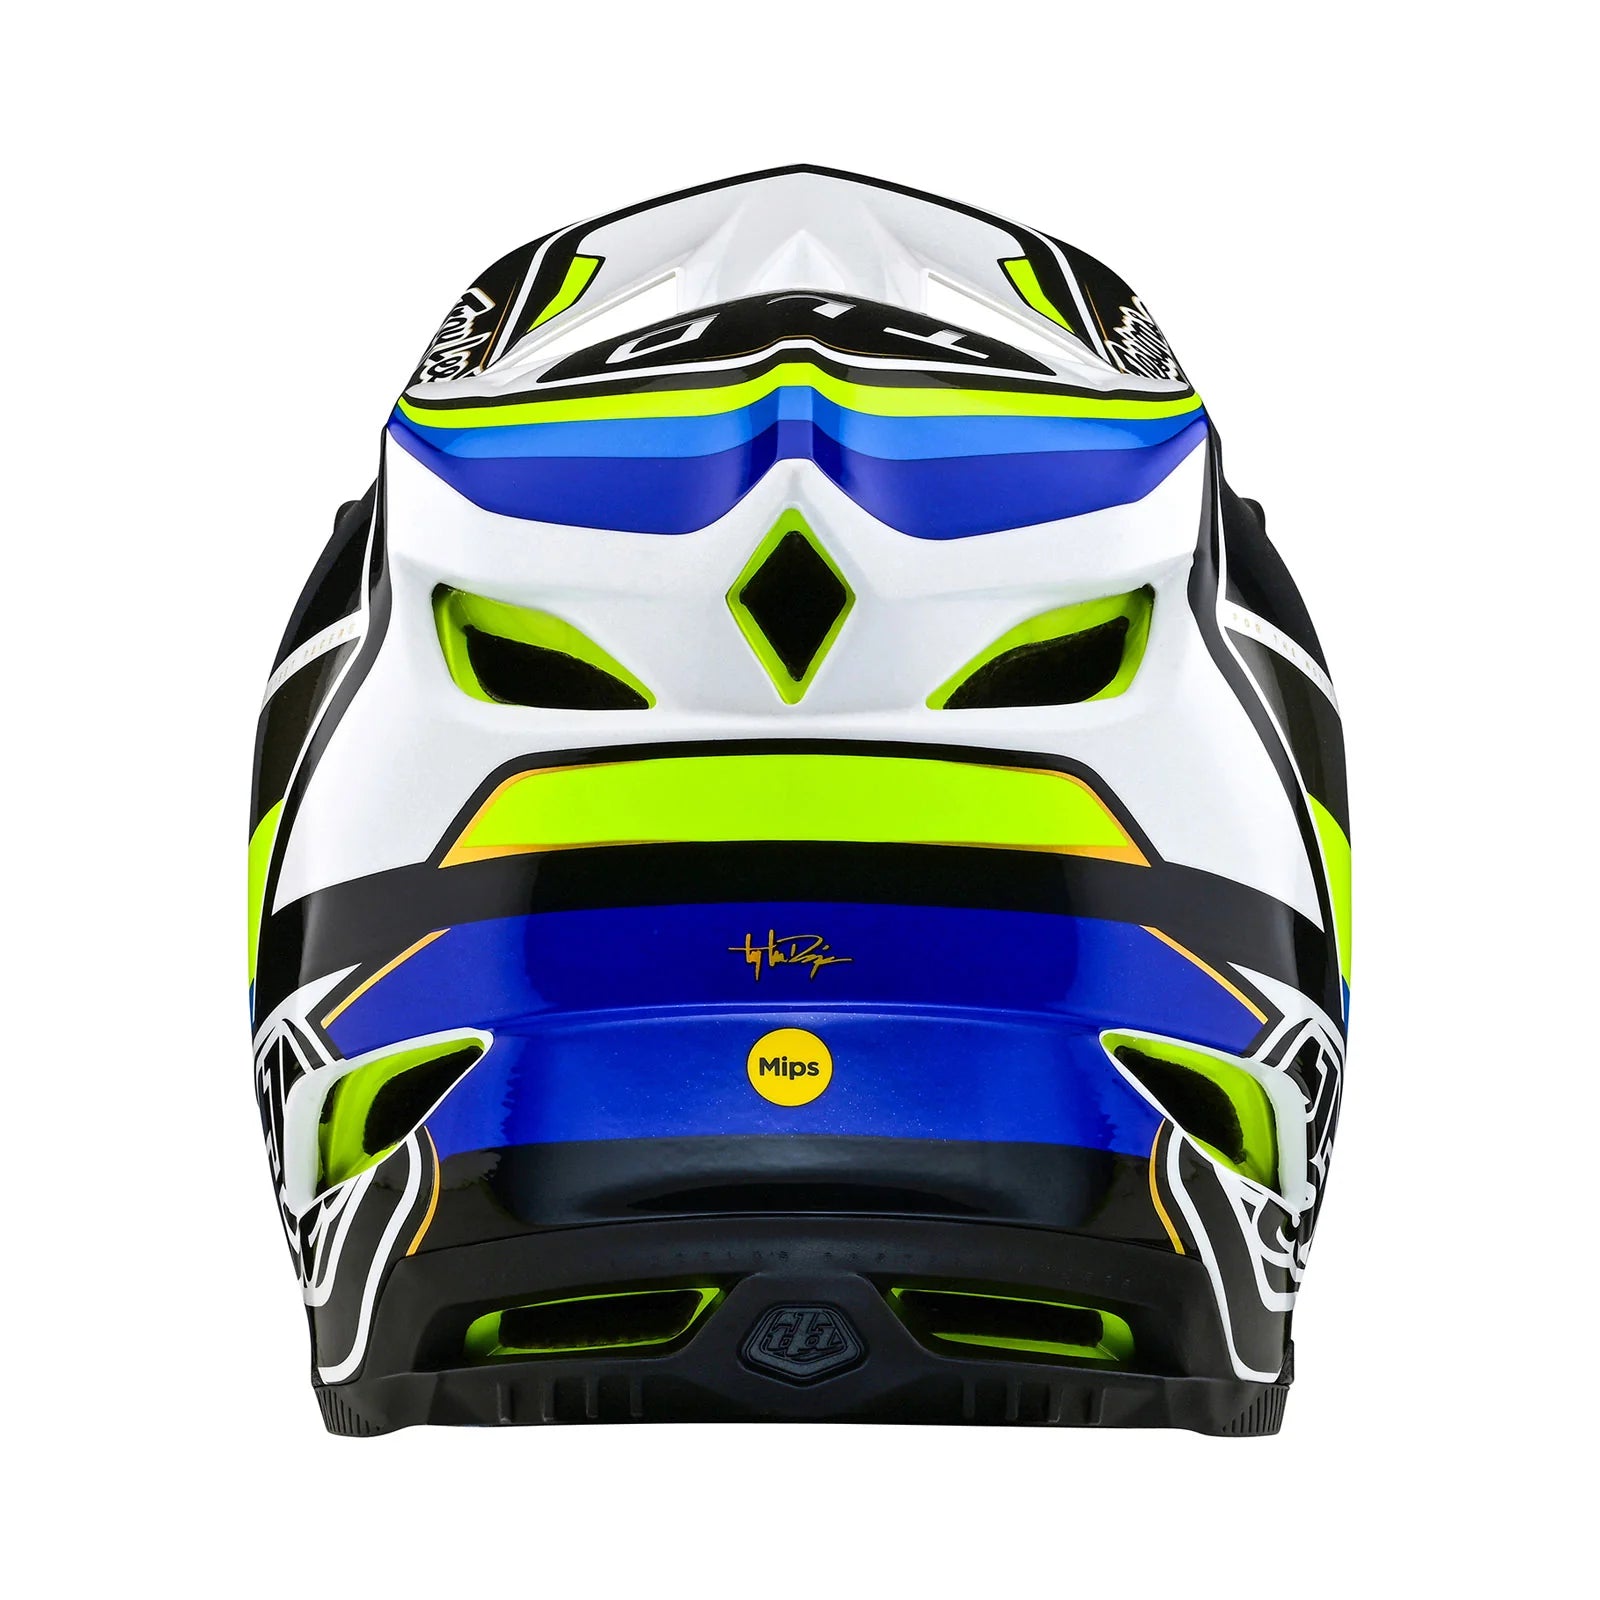 A TLD D4 AS Composite Helmet W/MIPS Reverb White with a blue and yellow design on a white background, featuring the Mips protection system for enhanced safety.